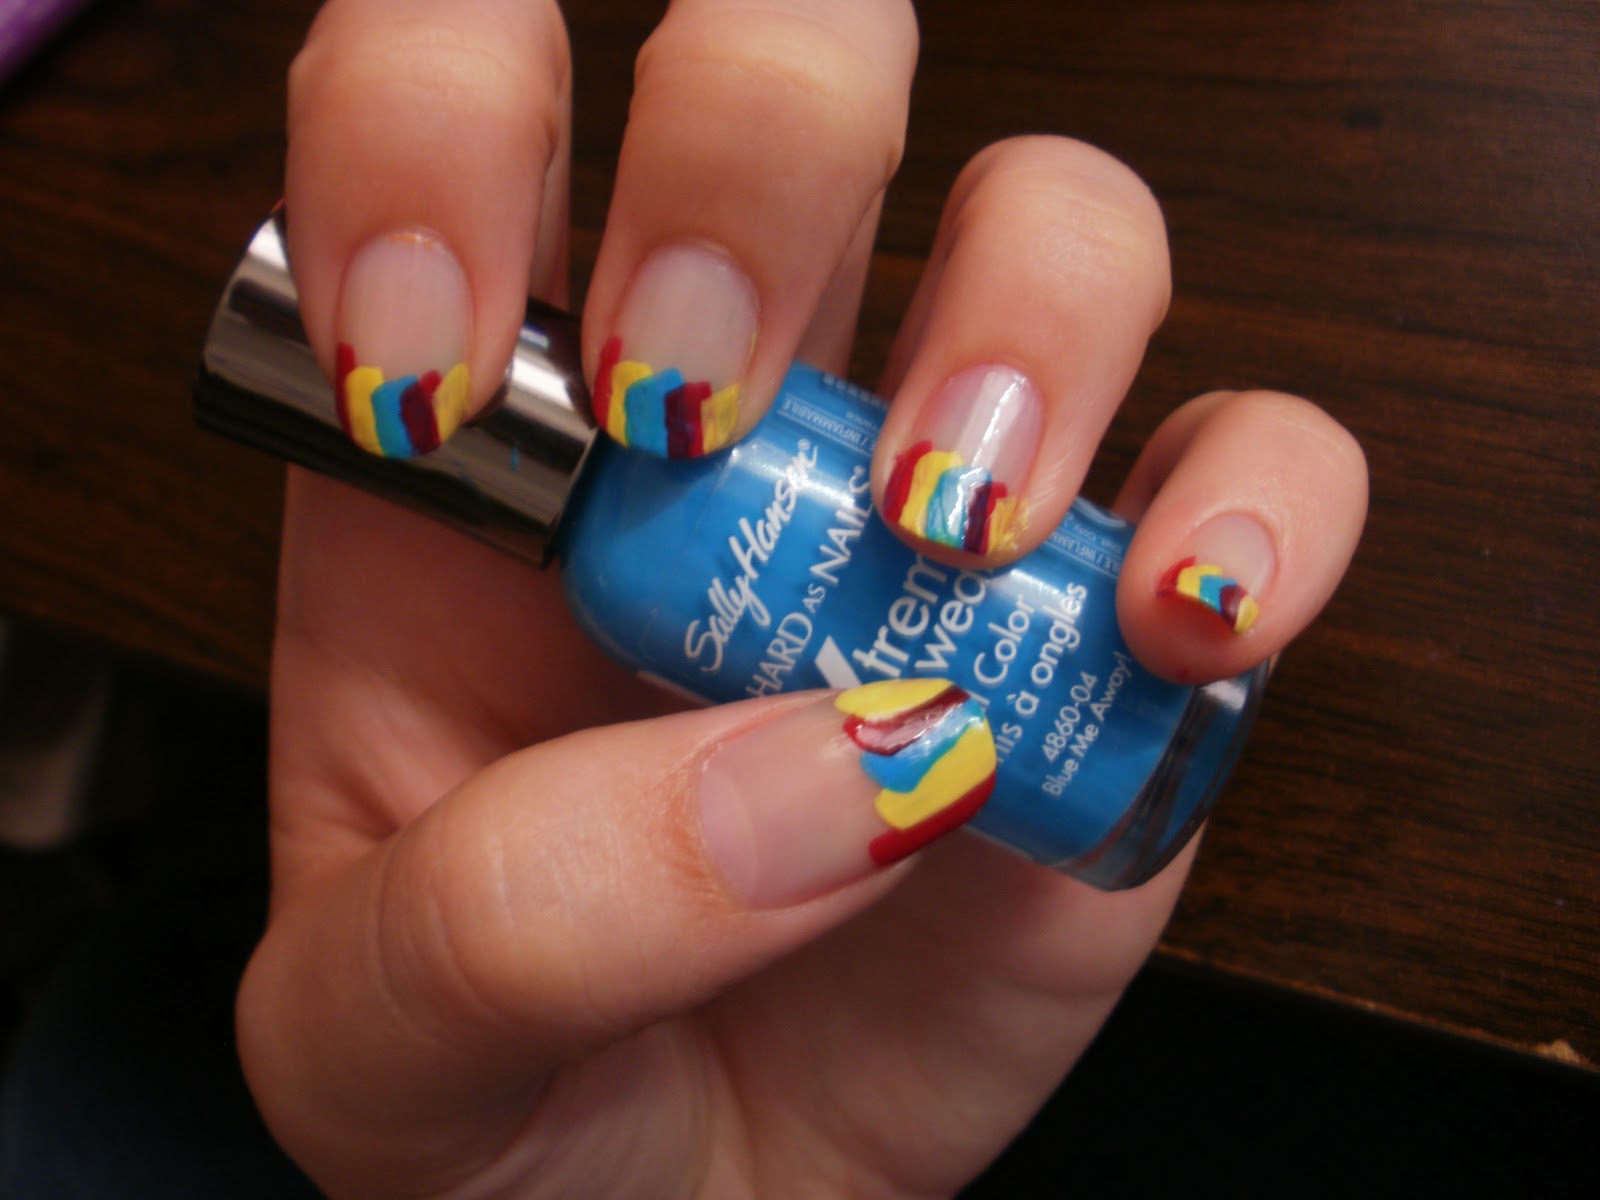 Artistry Nails: Primary French Nails